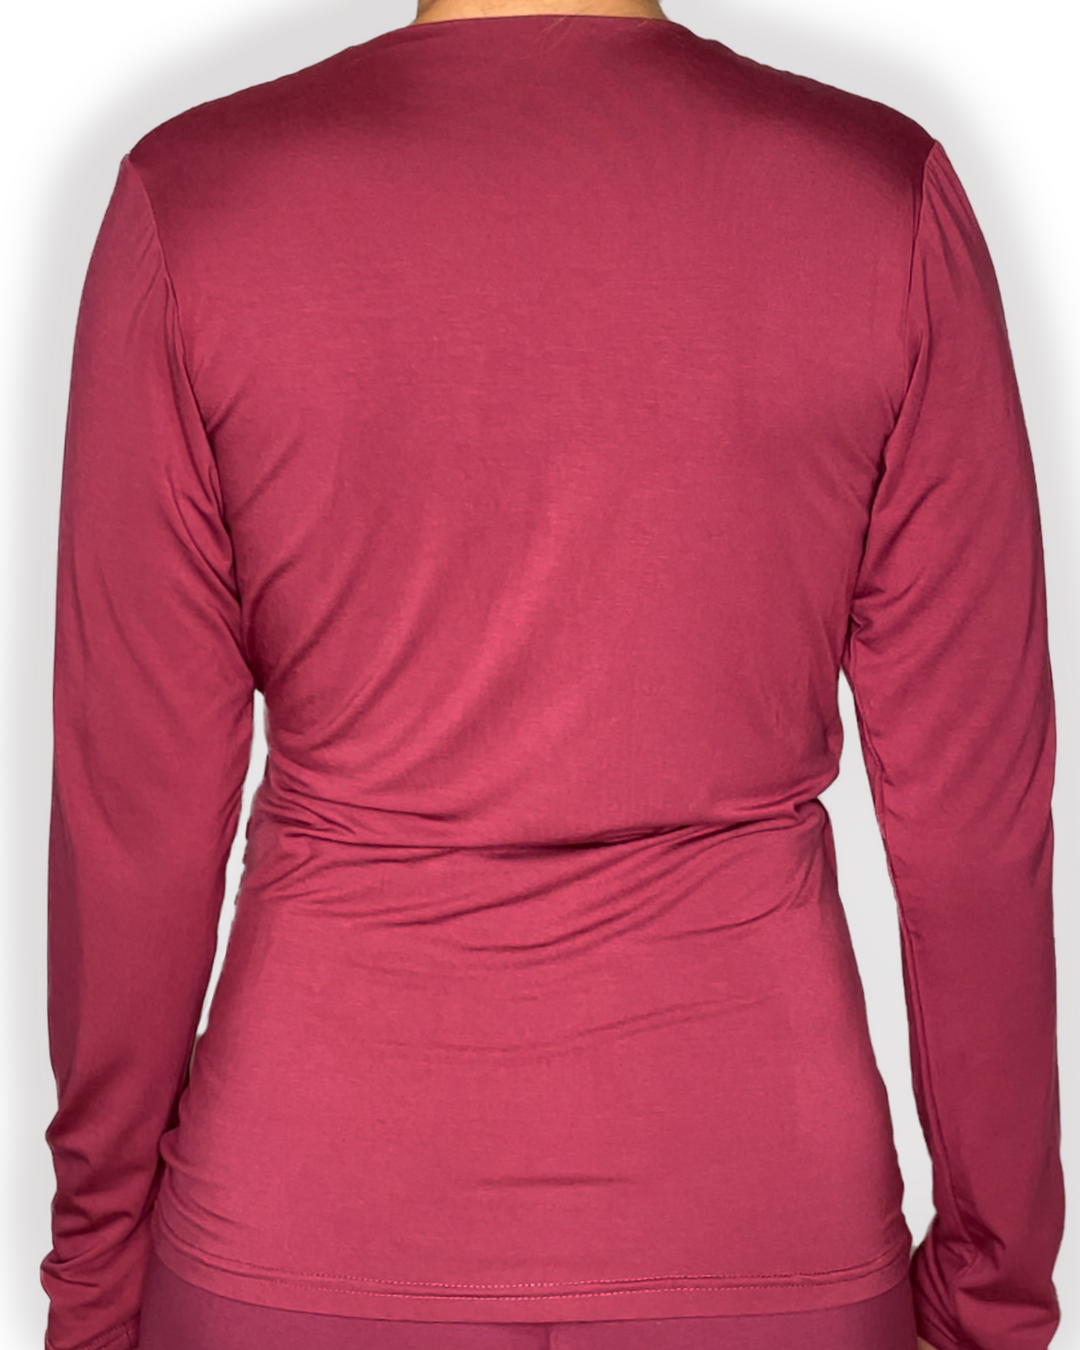 jia and kate ROSIE Braless Bamboo Wrap Top Long Sleeve in berry red color back view